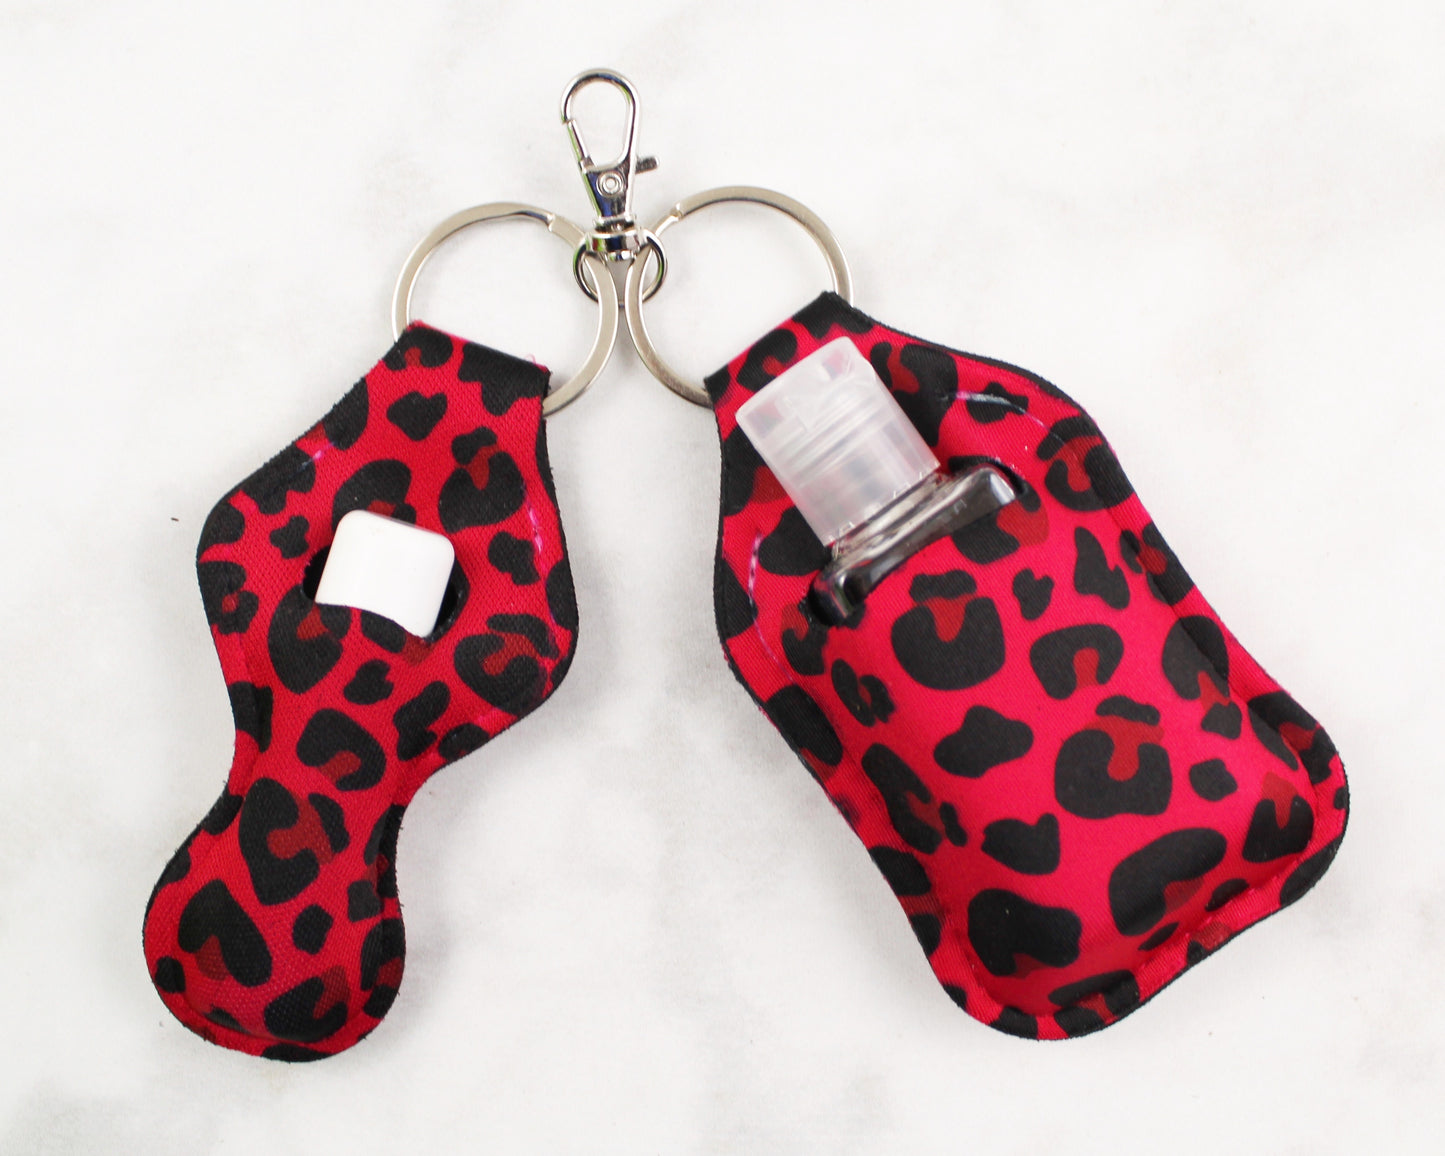 Hot Pink and Black Cheetah Hand Sanitizer and Lip Balm Holders